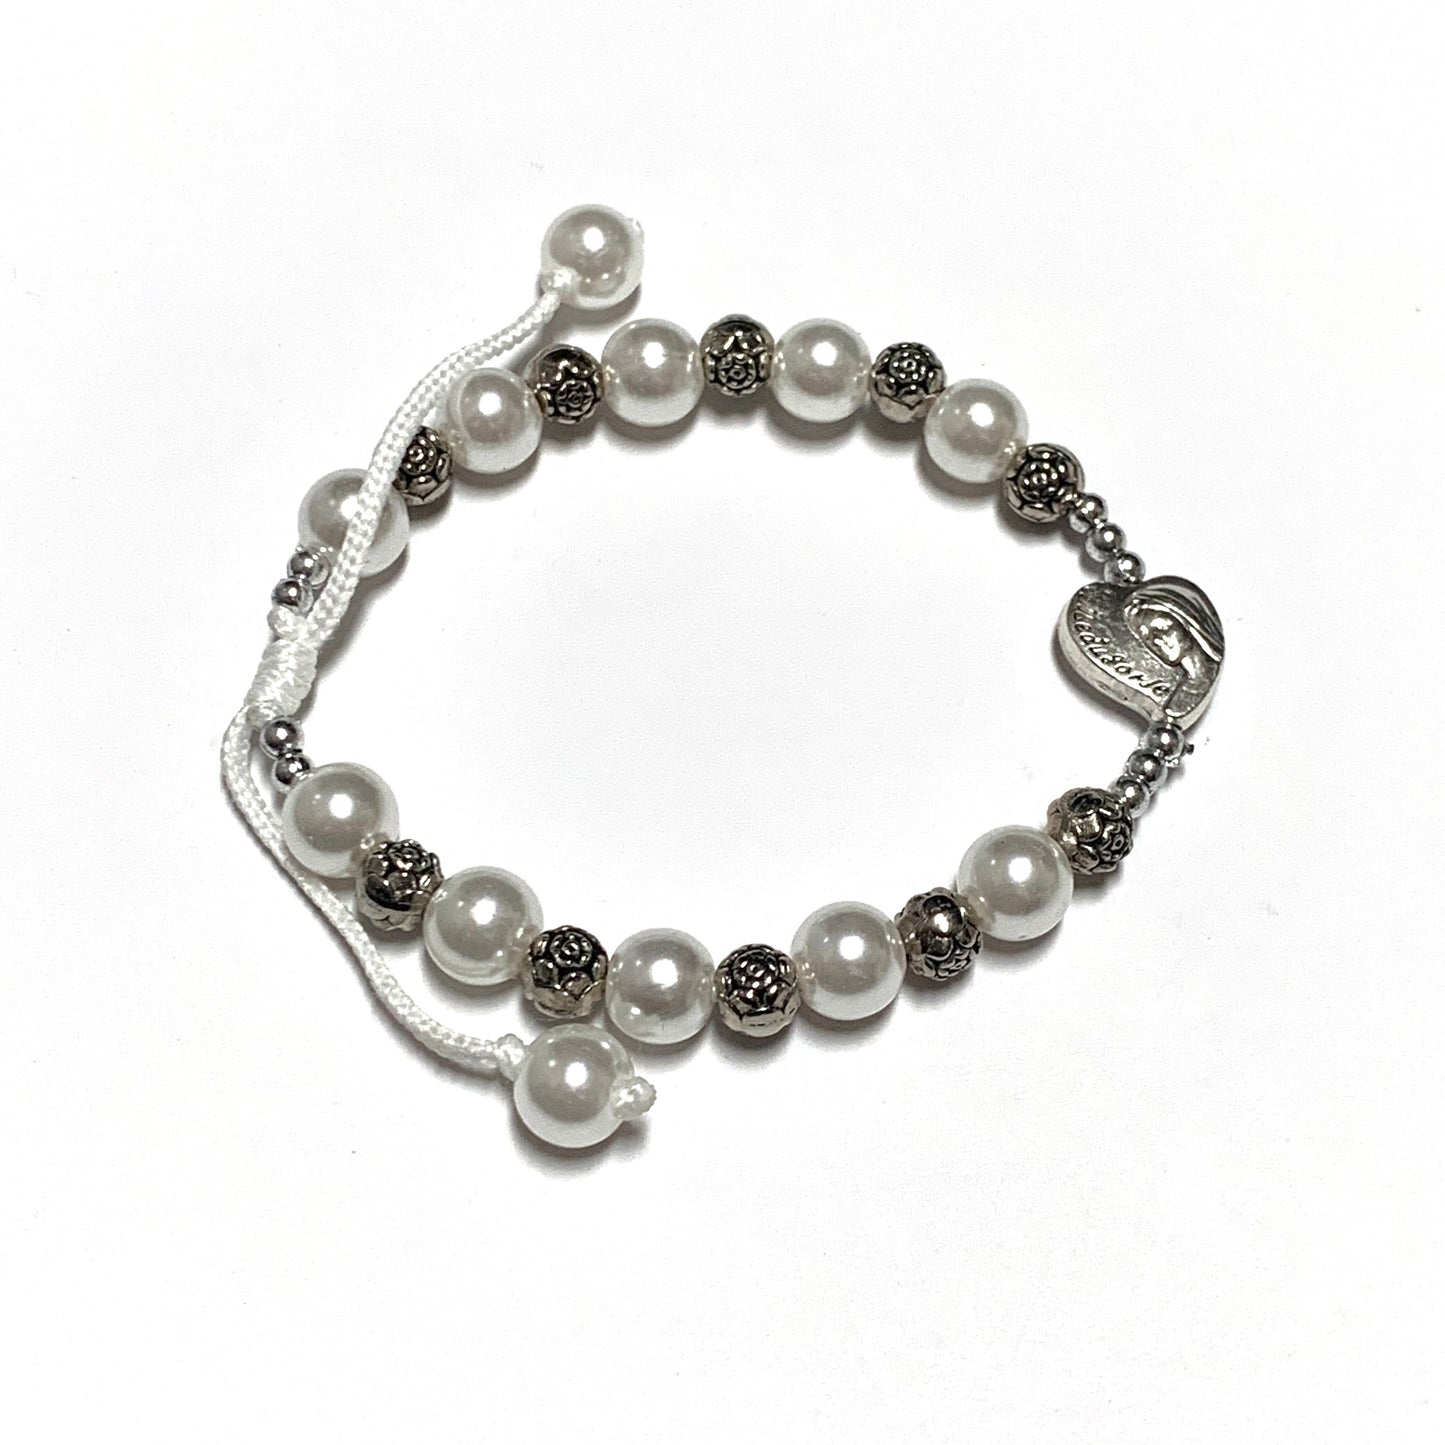 Queen of Peace Pearl and Rose Decade Rosary Bracelet